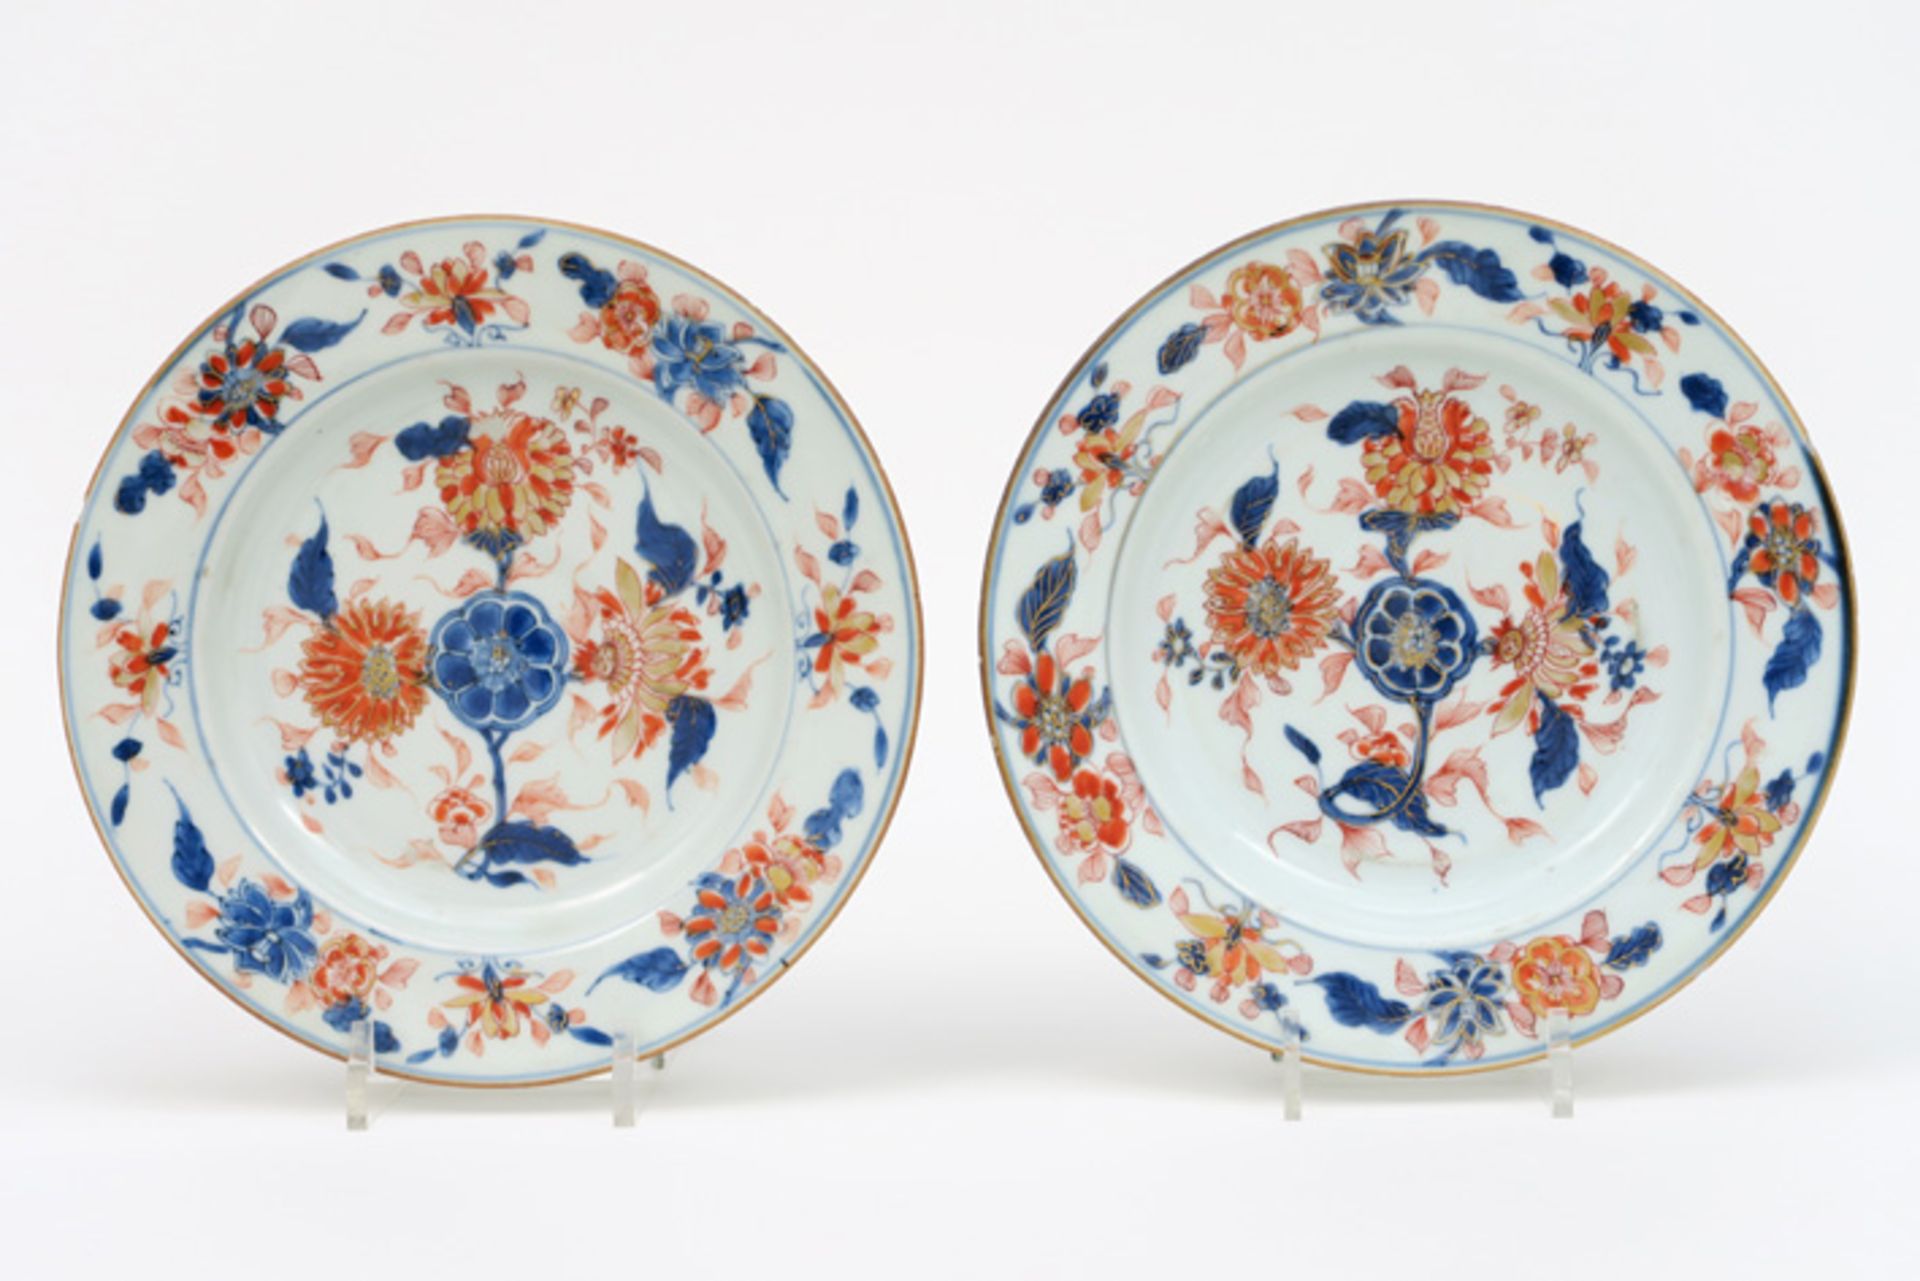 pair of 18th Cent. Chinese plates in porcelain with Imari flower decor||Paar achttiende eeuwse